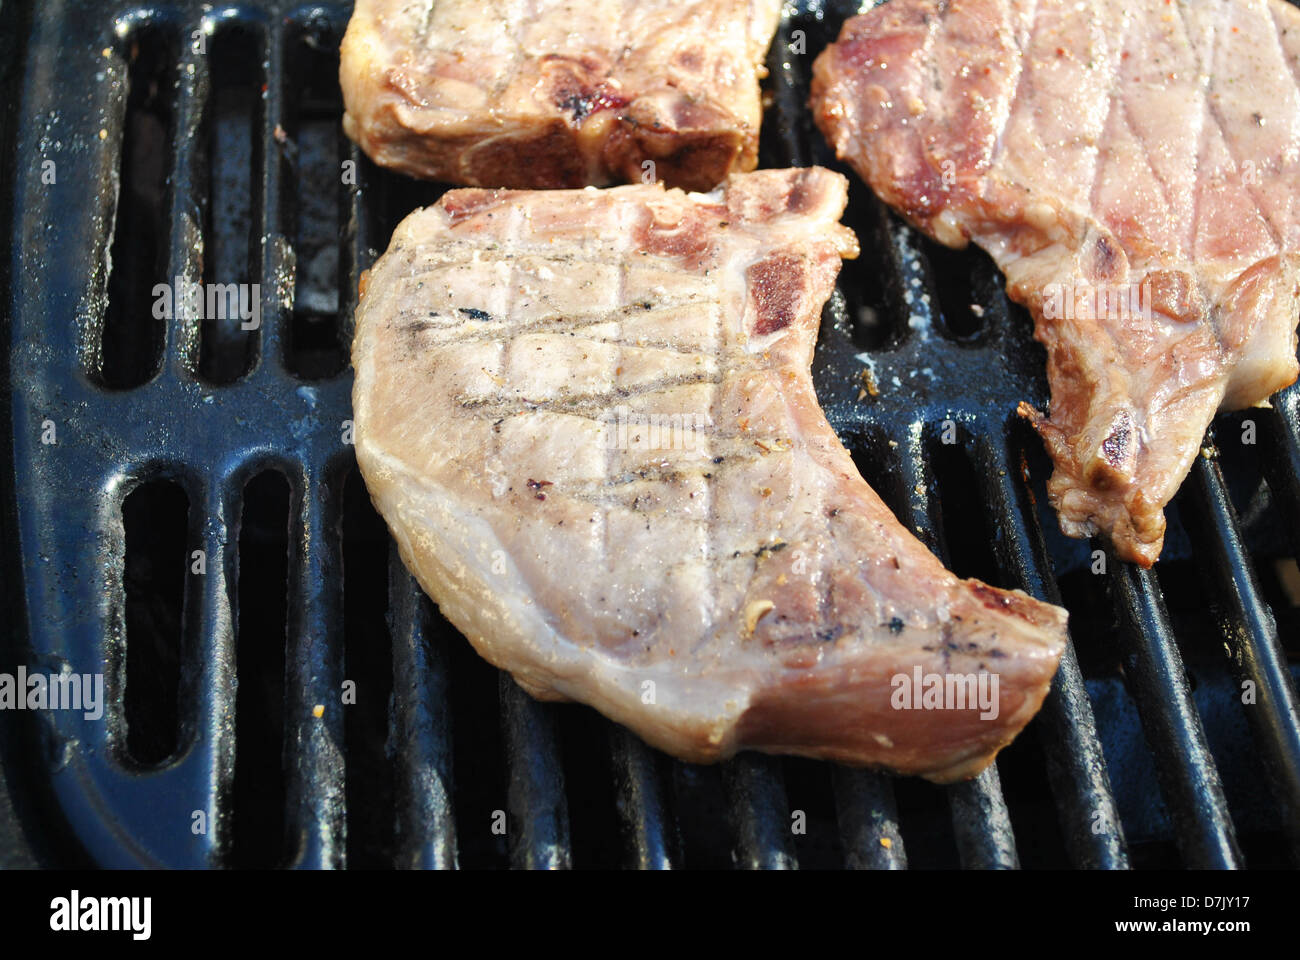 Grilling Pork Chops on a Summer Grill Stock Photo